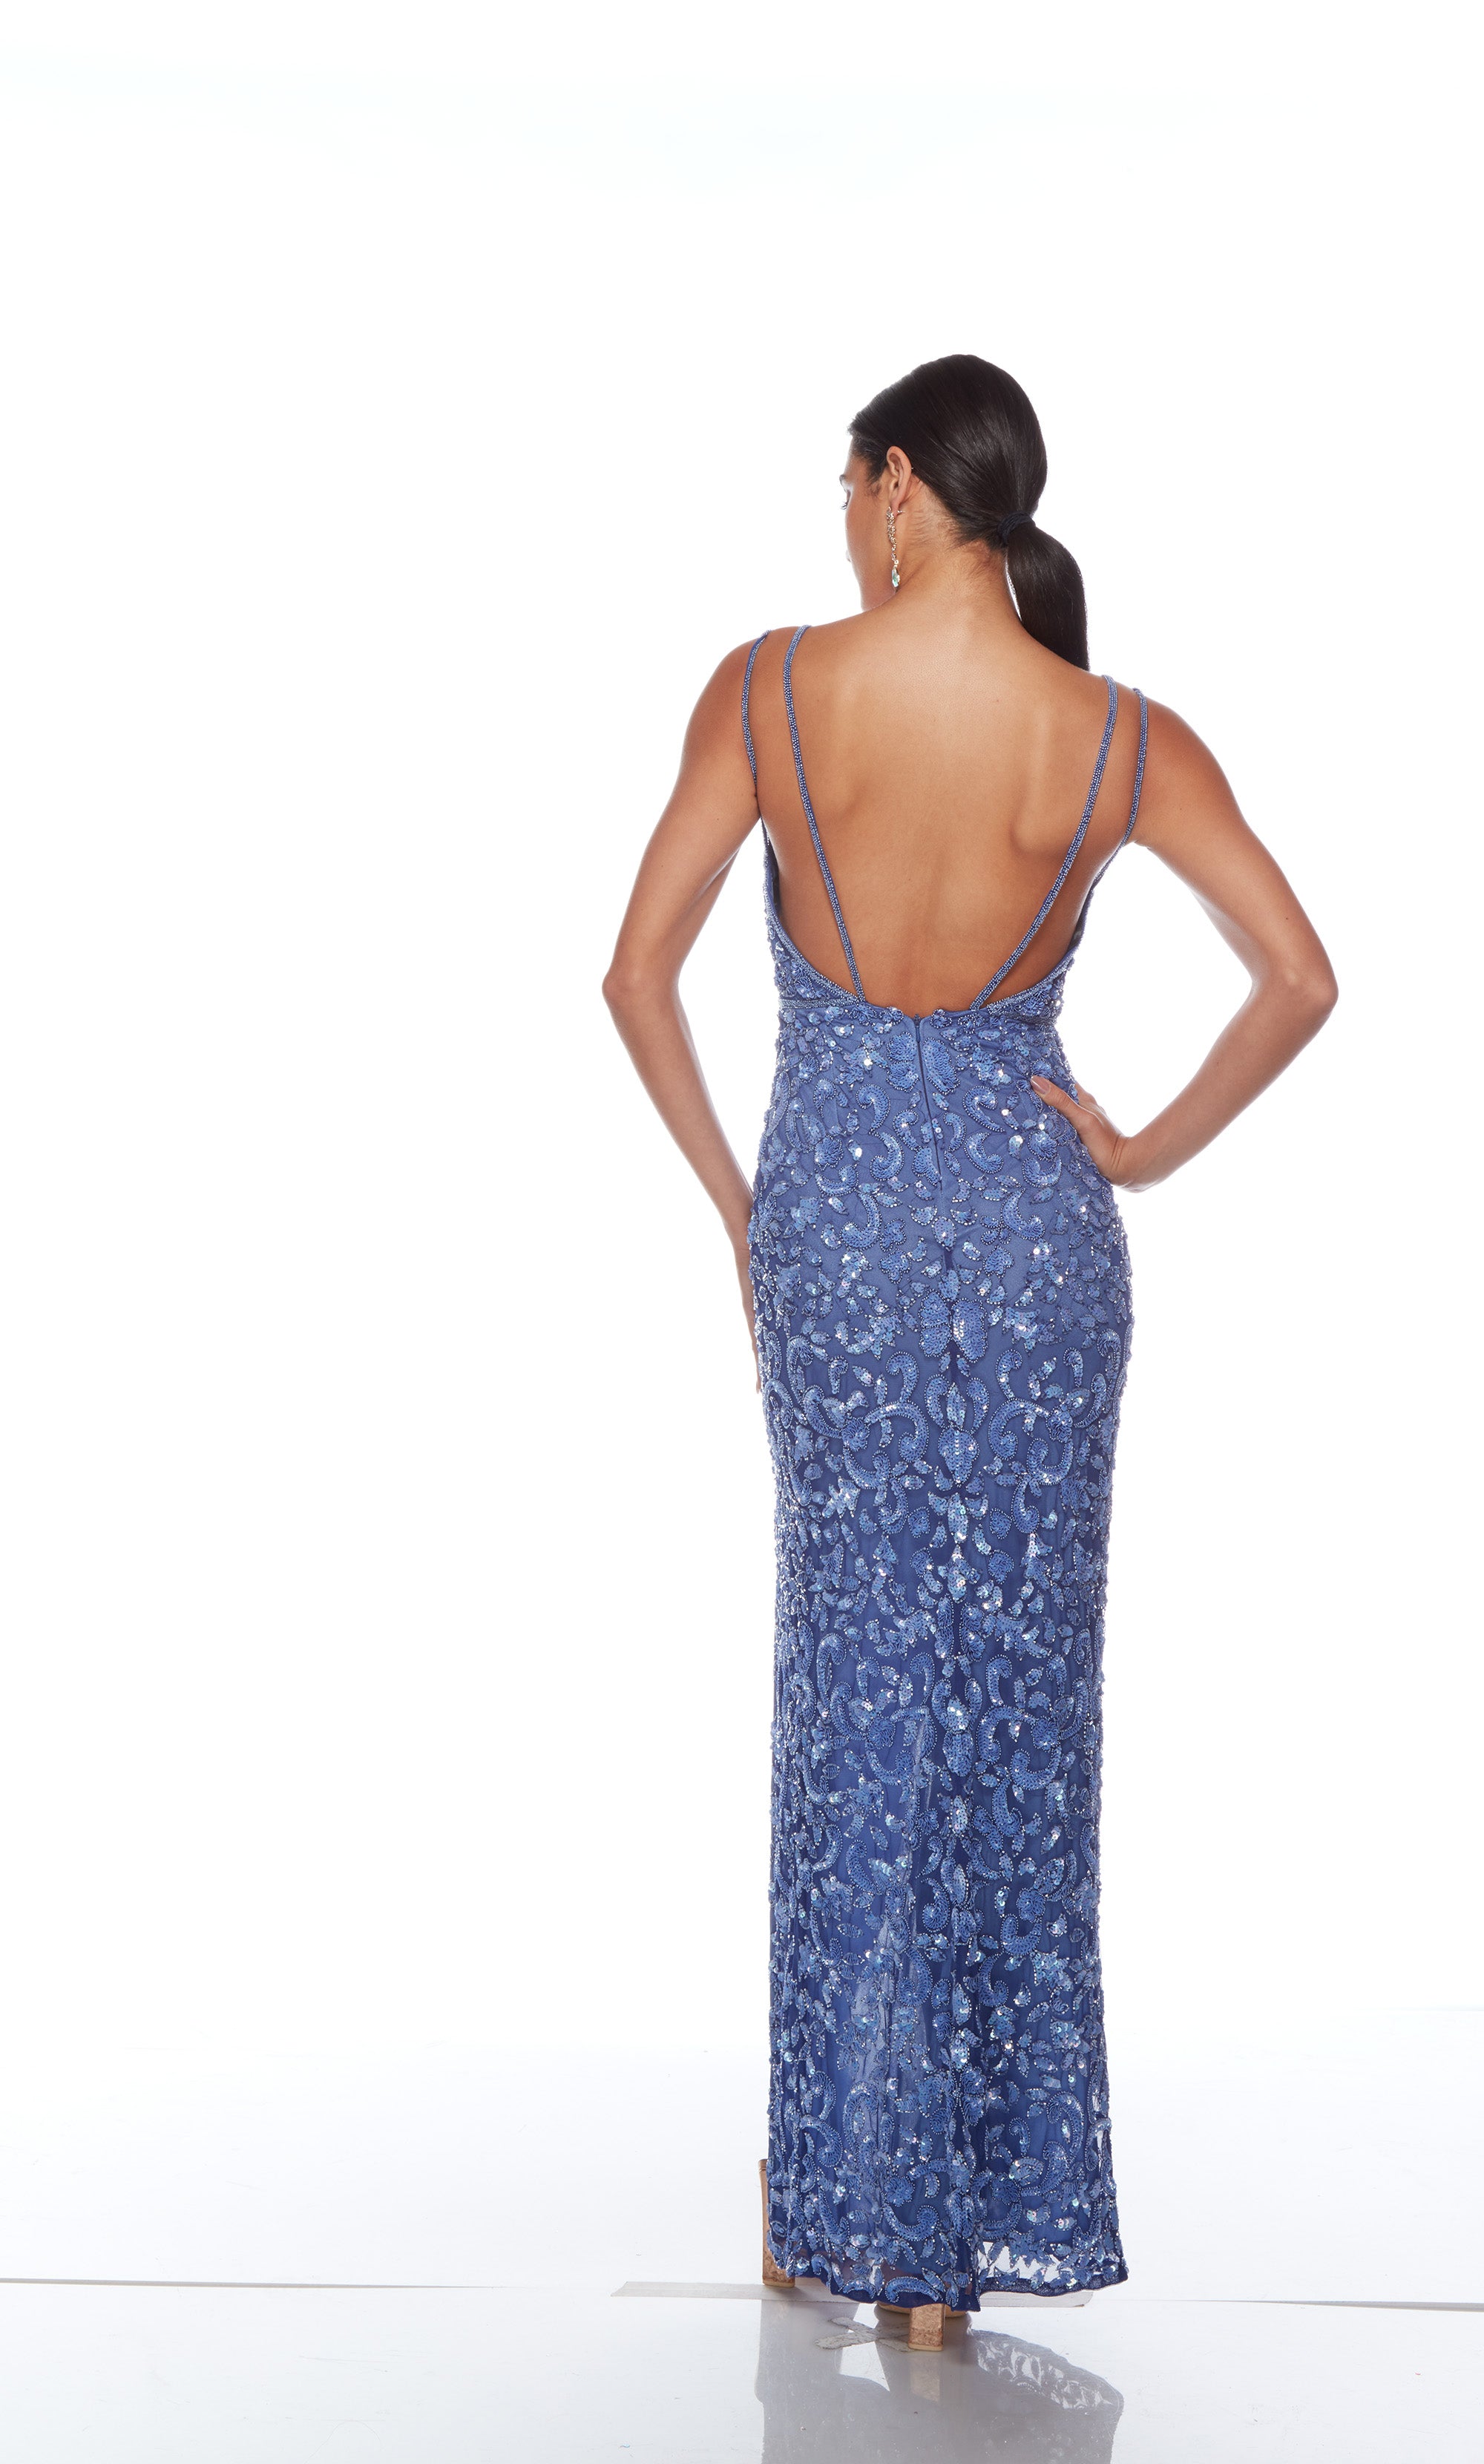 Elegant purple formal gown: Hand-beaded, V neckline, side slit, dual beaded straps, intricate paisley-patterned design for an chic and sophisticated look.